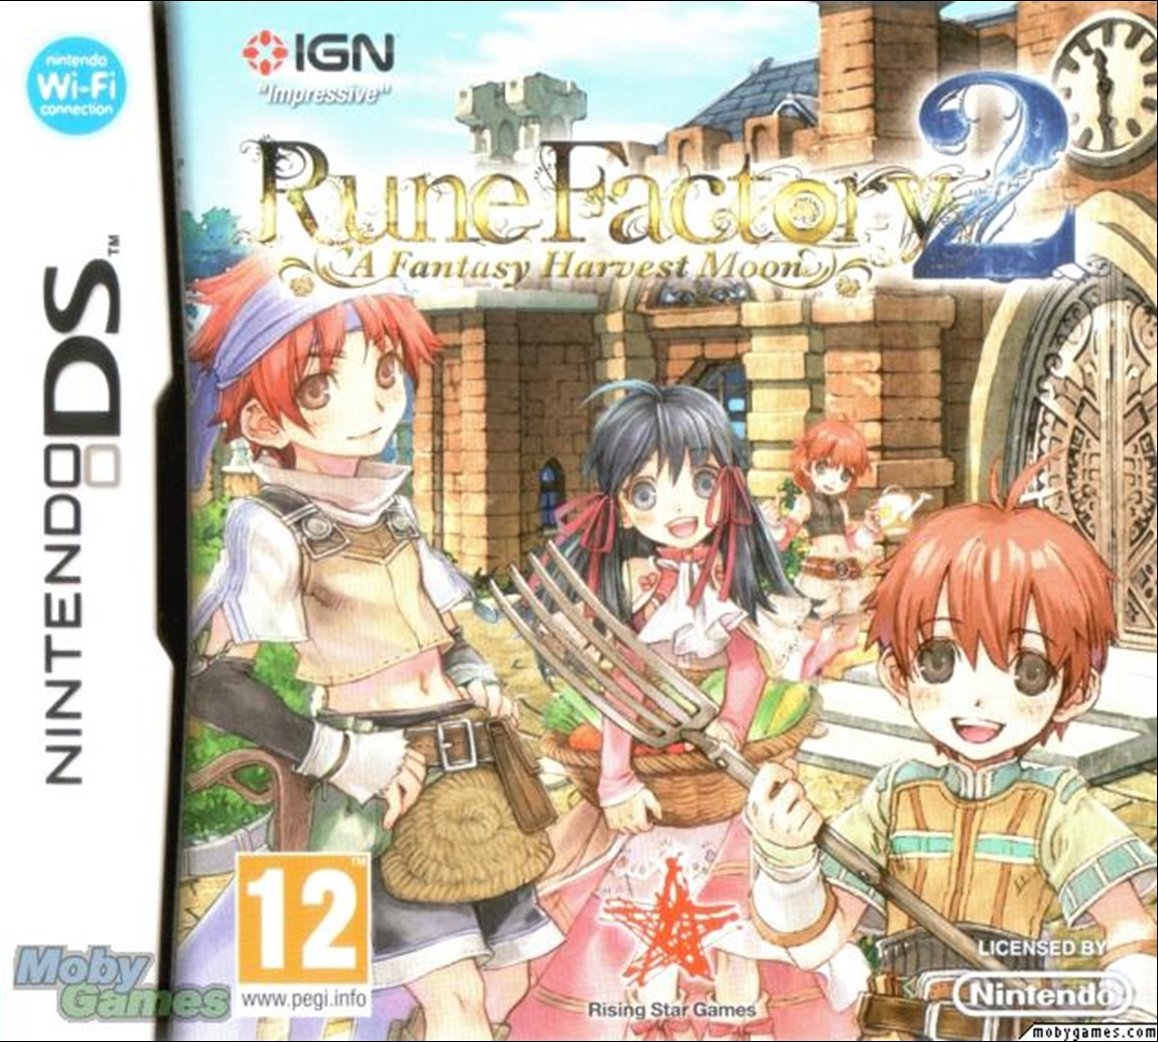 Image of Rune Factory 2: A Fantasy Harvest Moon